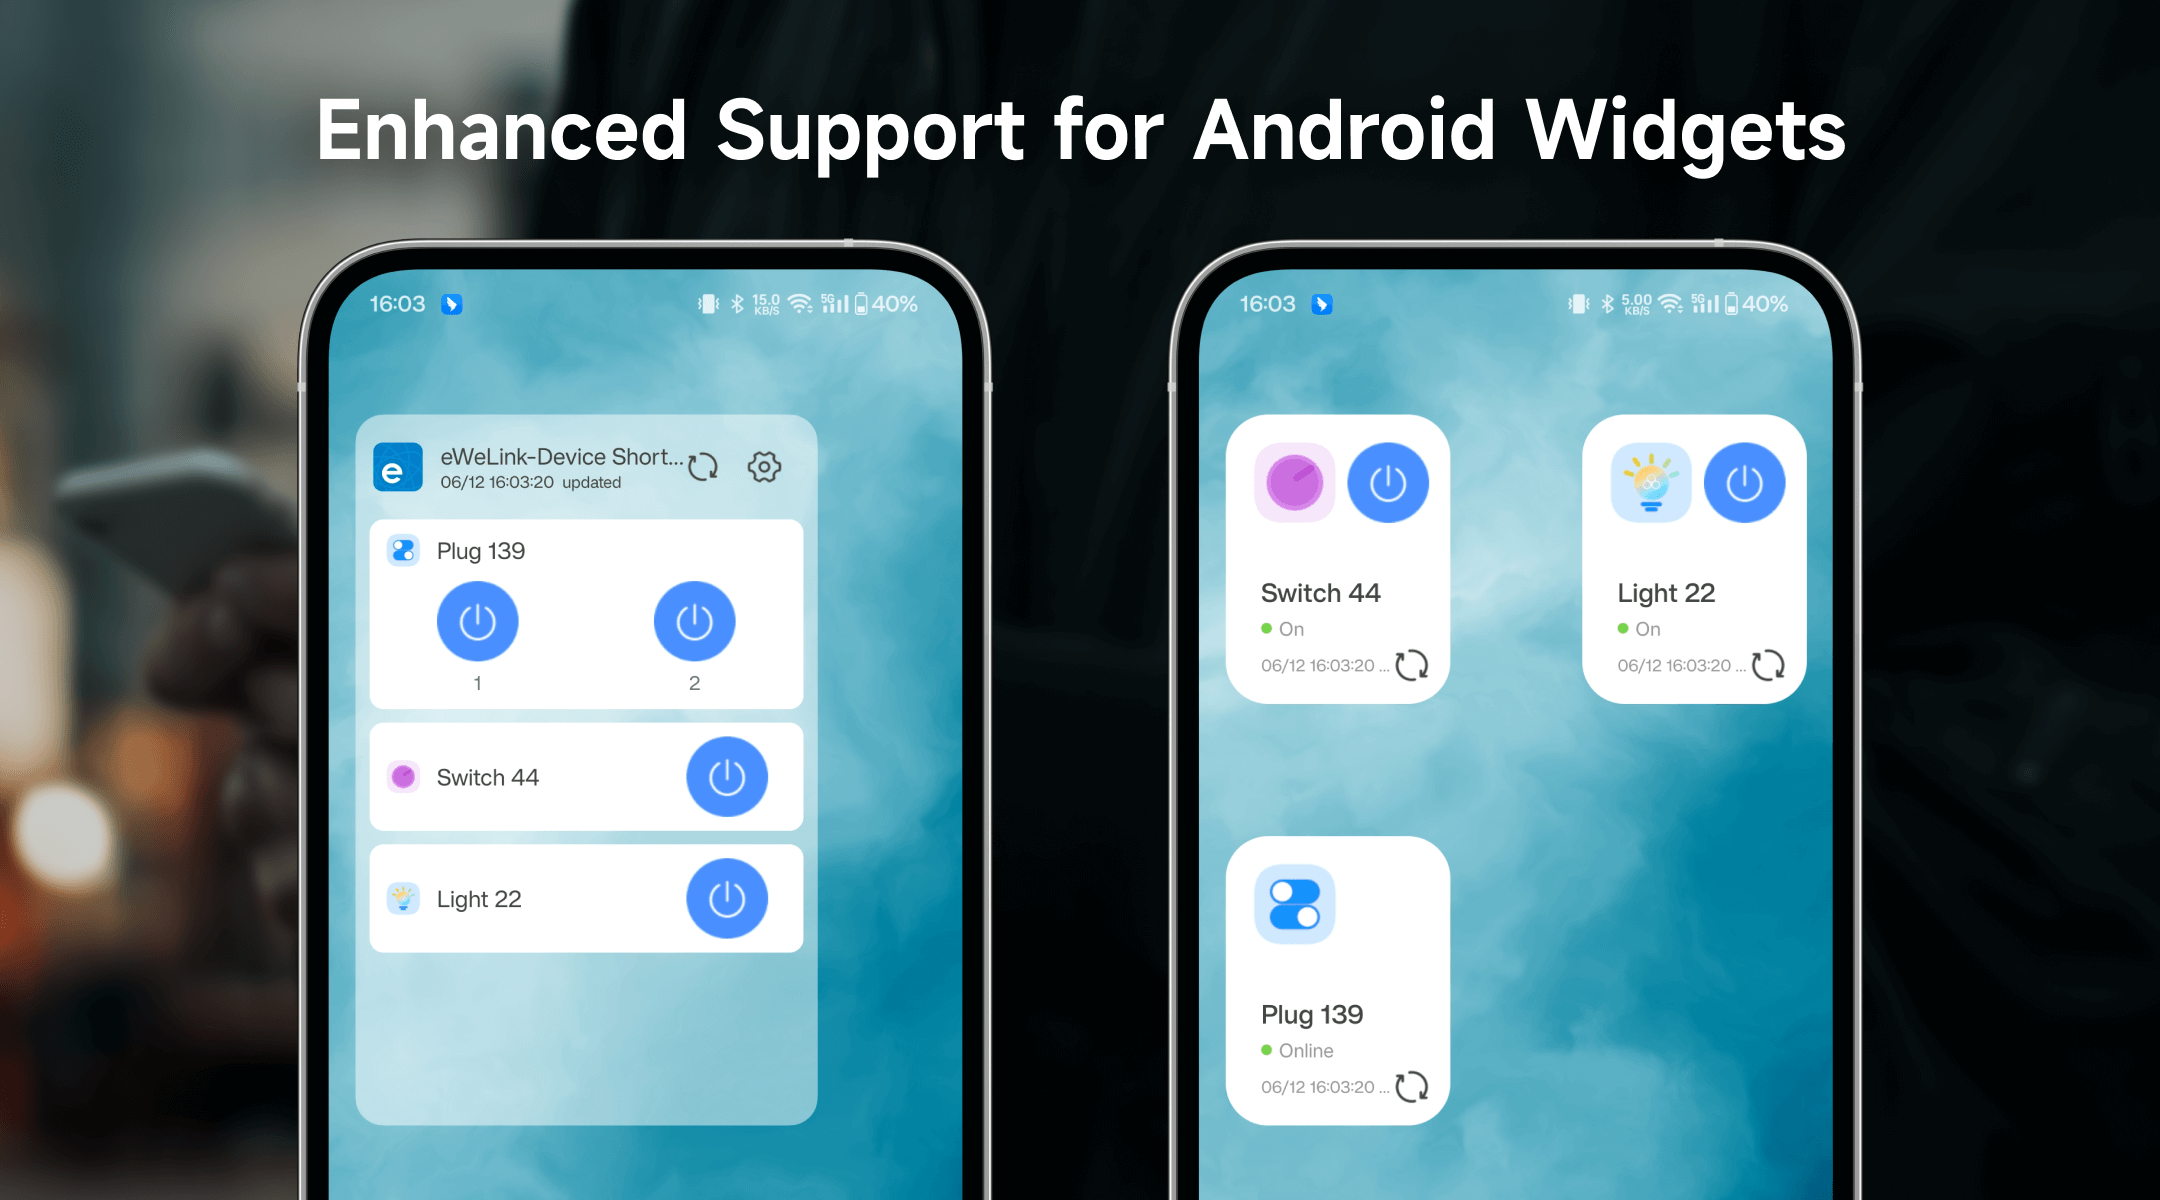 Enhanced Support for Android Widgets